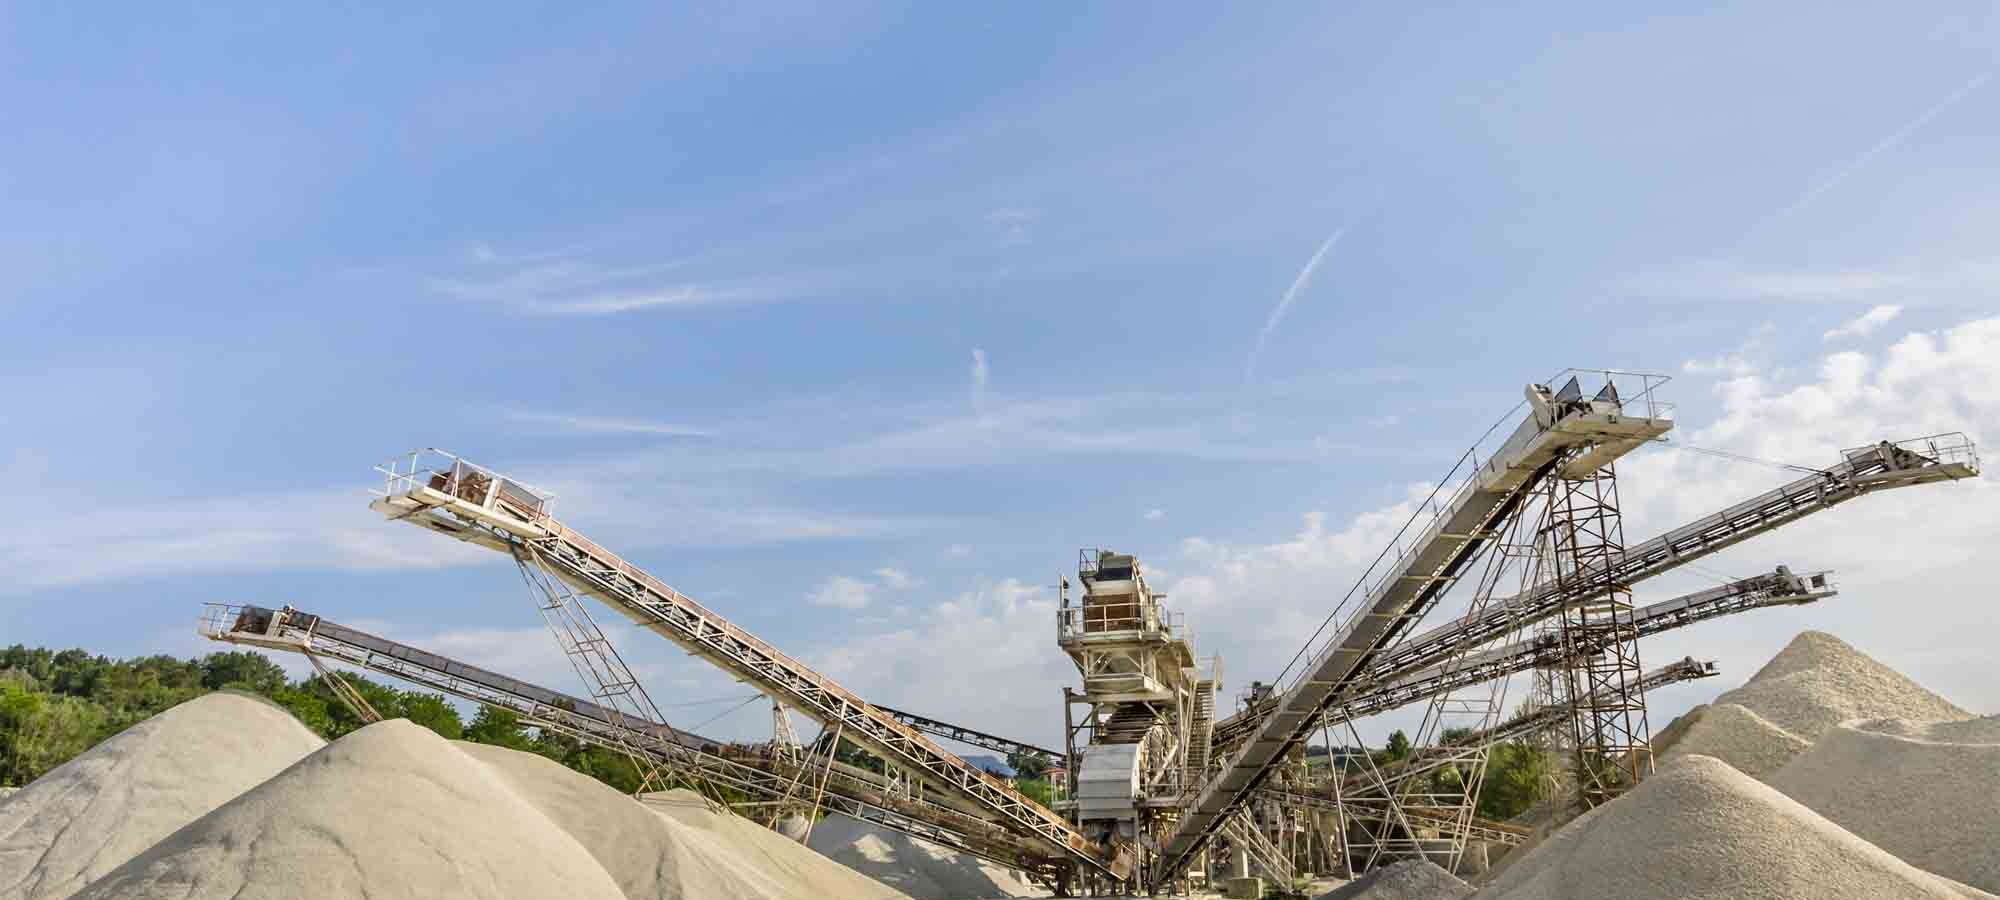 Australian manufacturer and supplier of conveyor to the quarry industry